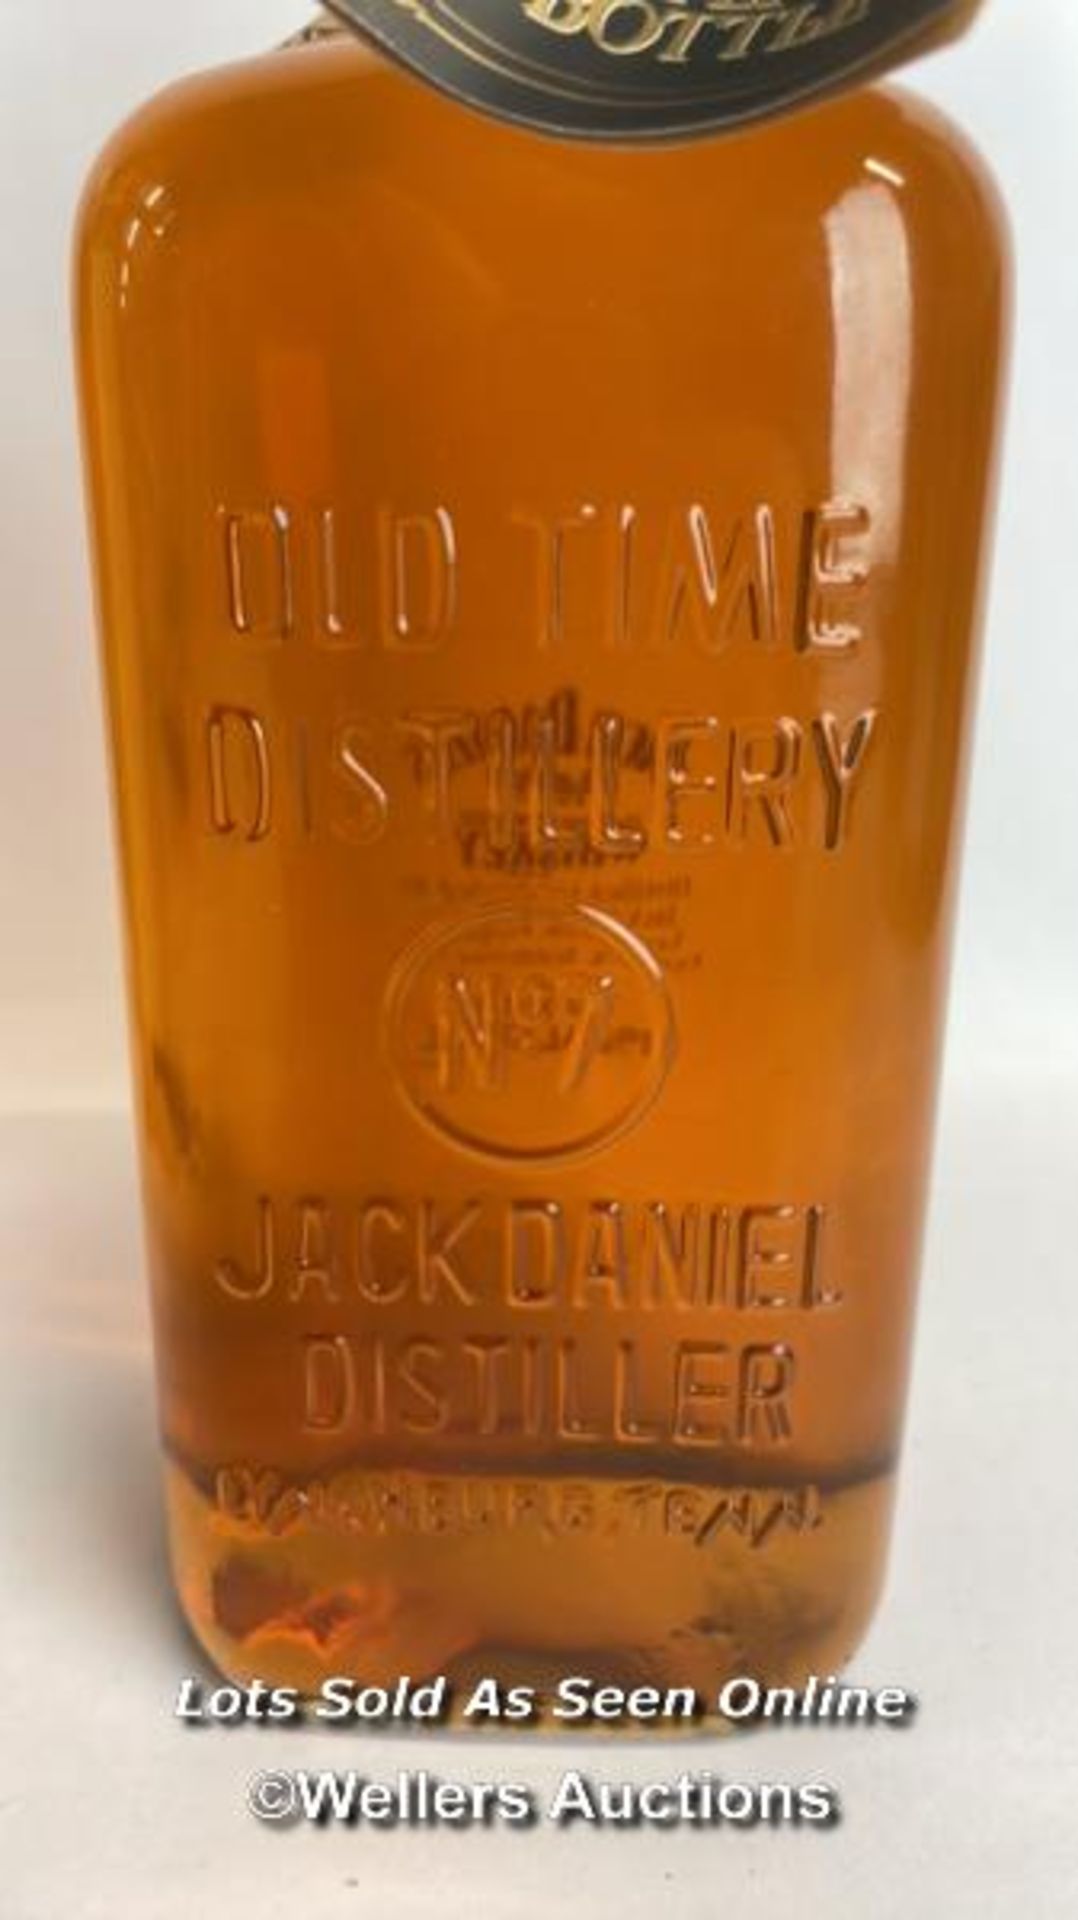 1895 Jack Daniels Replica Bottle, Old No.7 Brand, Old Time Tennessee Whiskey, 1L, 43% vol / Please - Image 5 of 7